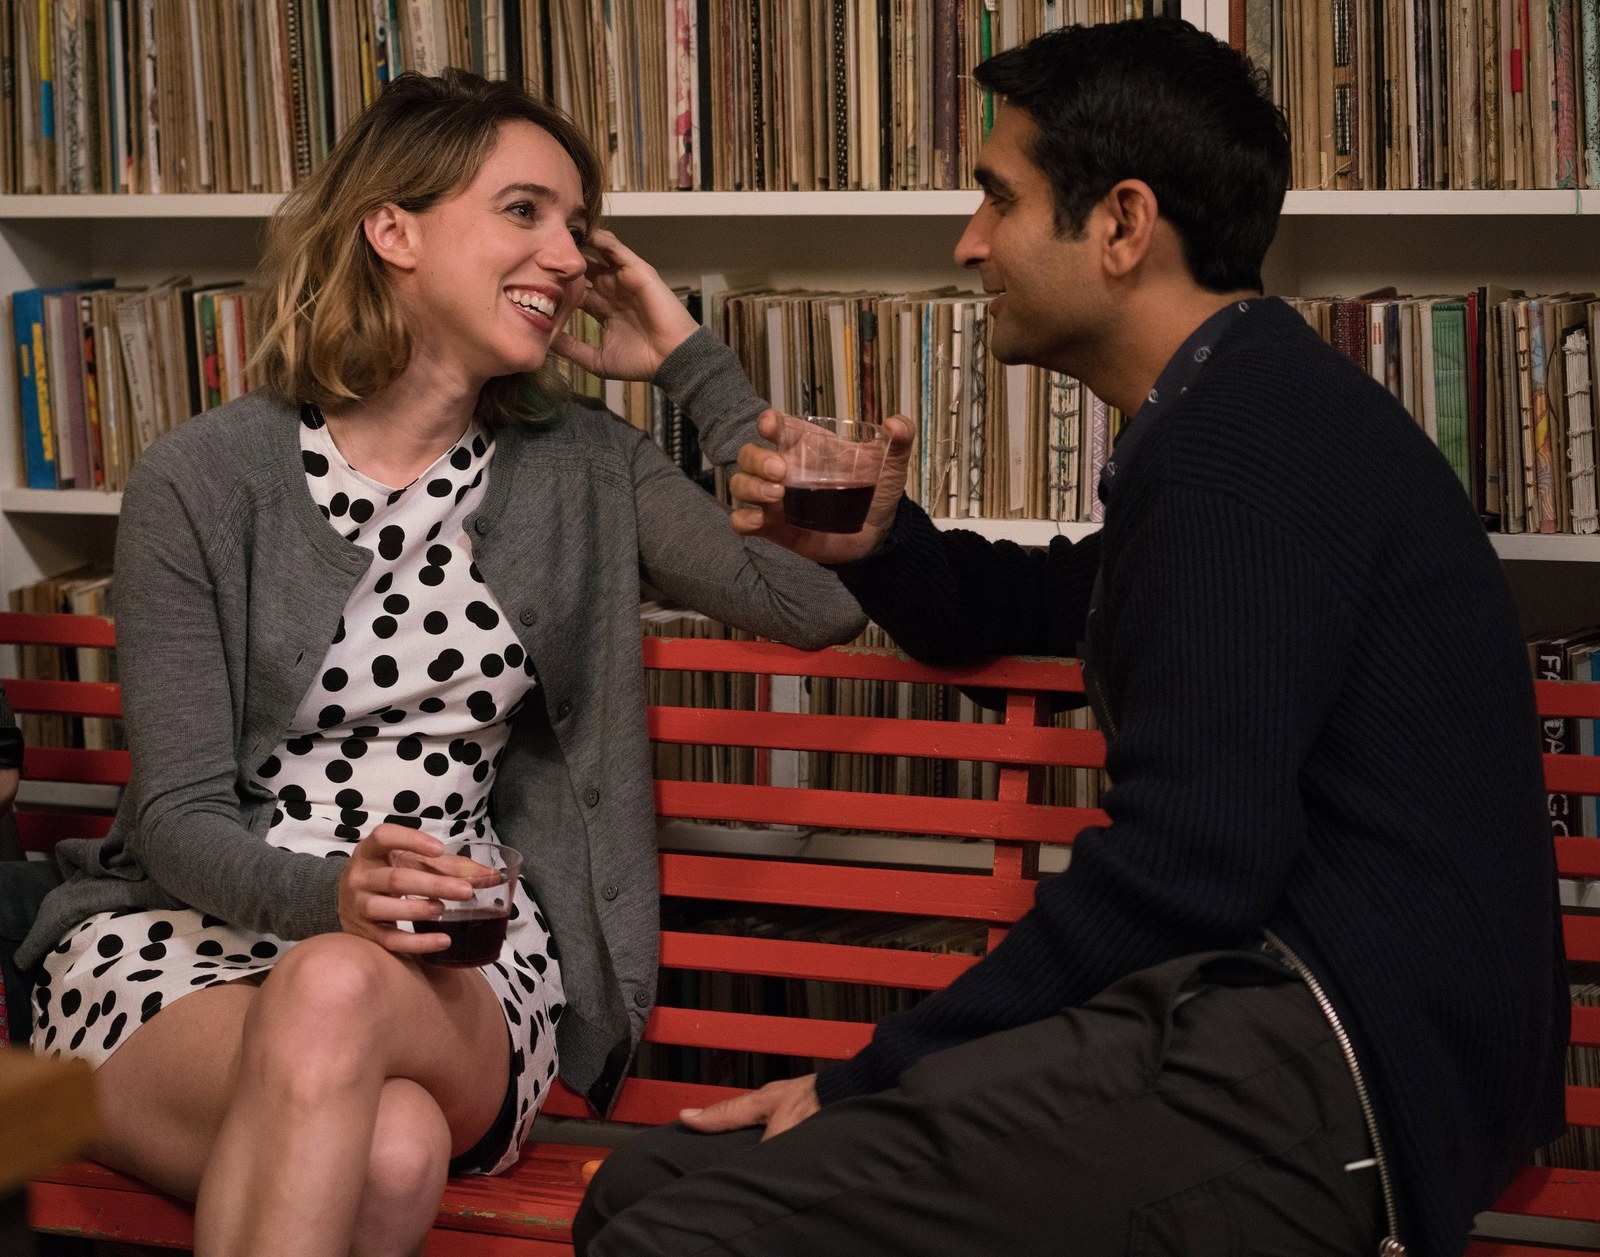 Why Are Brown Men So Infatuated With White Women Onscreen? pic